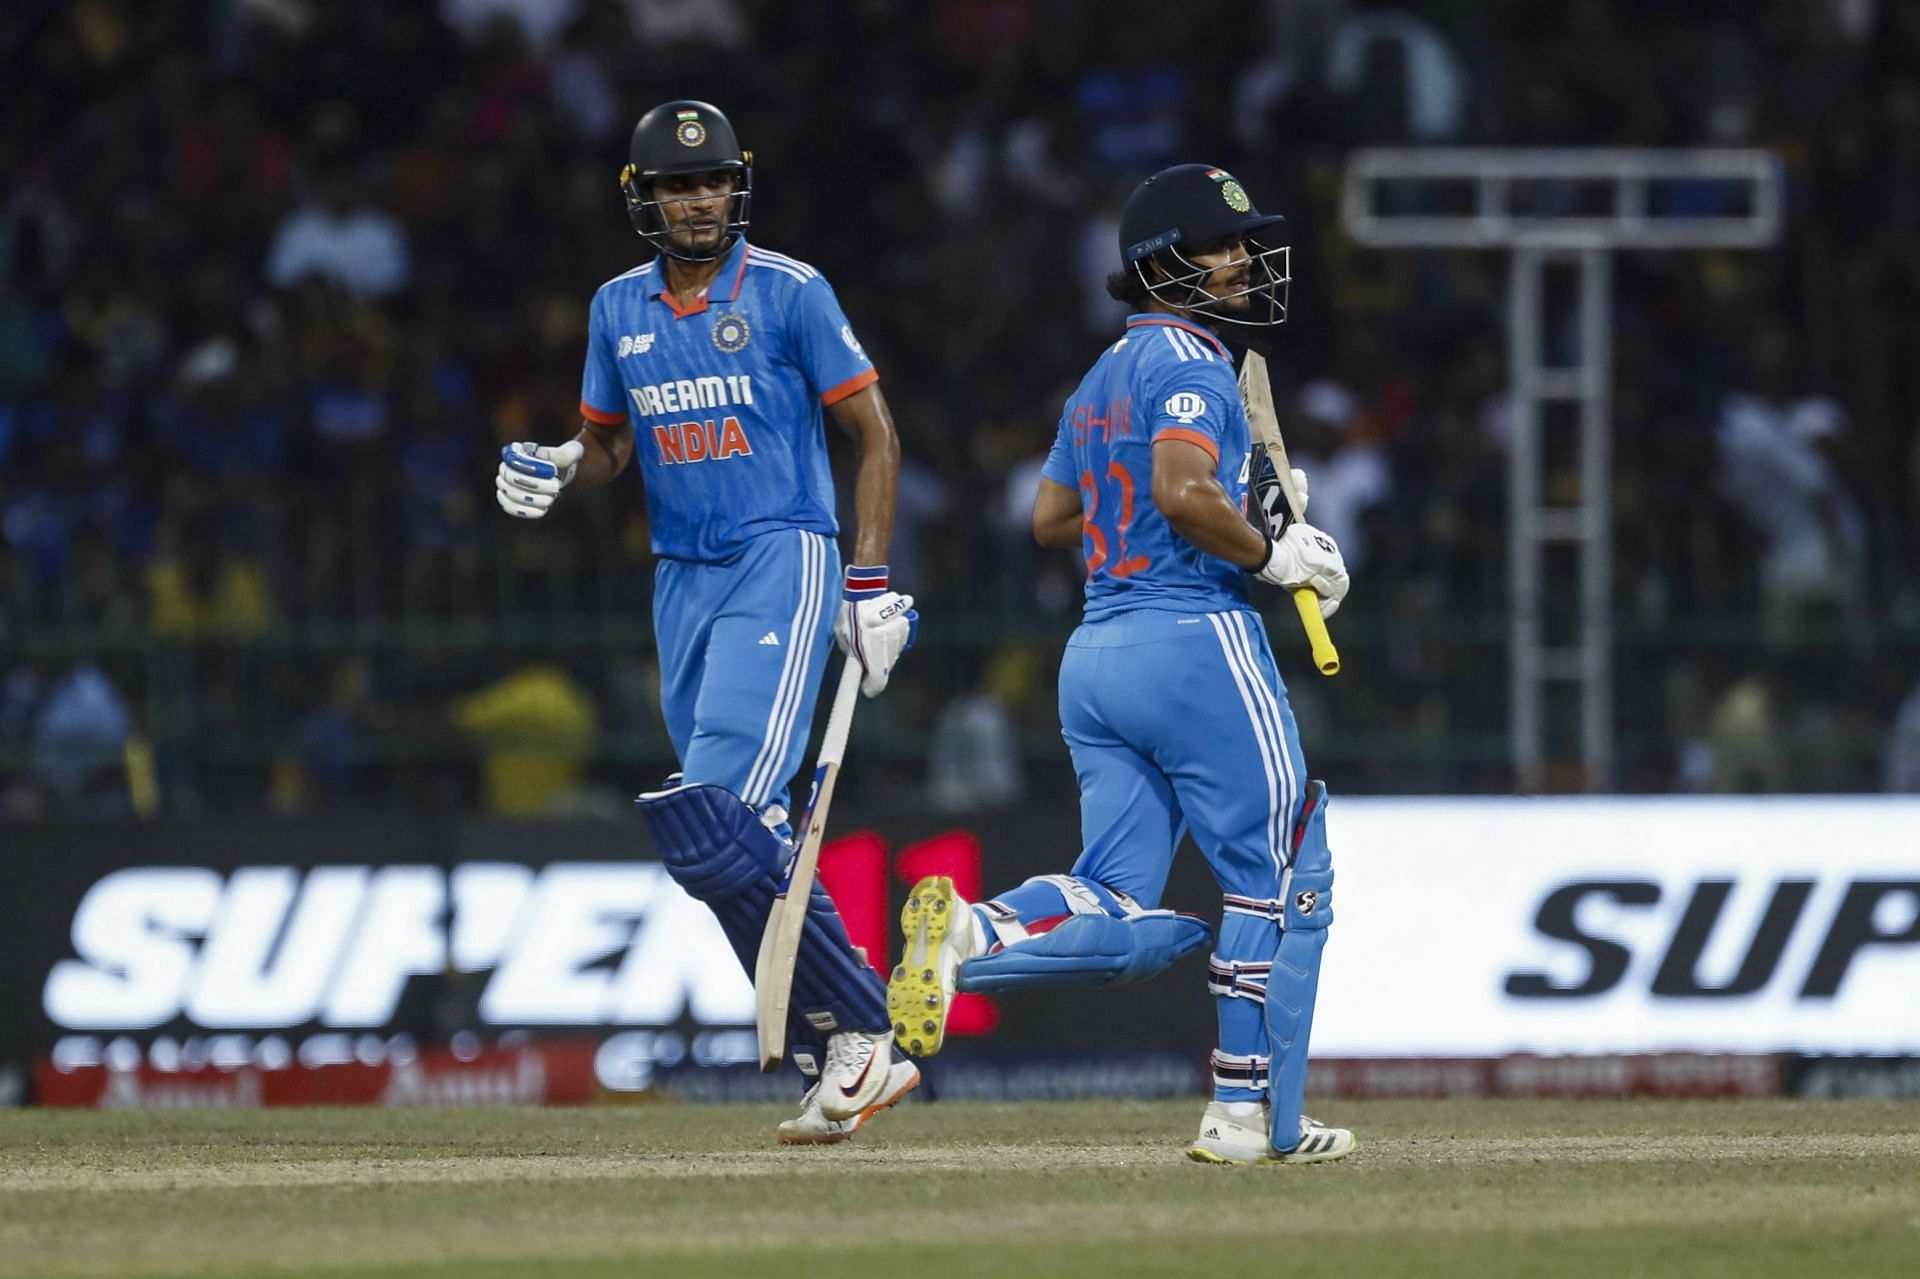 Shubman Gill and Ishan Kishan ensured that there were no hiccups in the run chase. [P/C: AP]